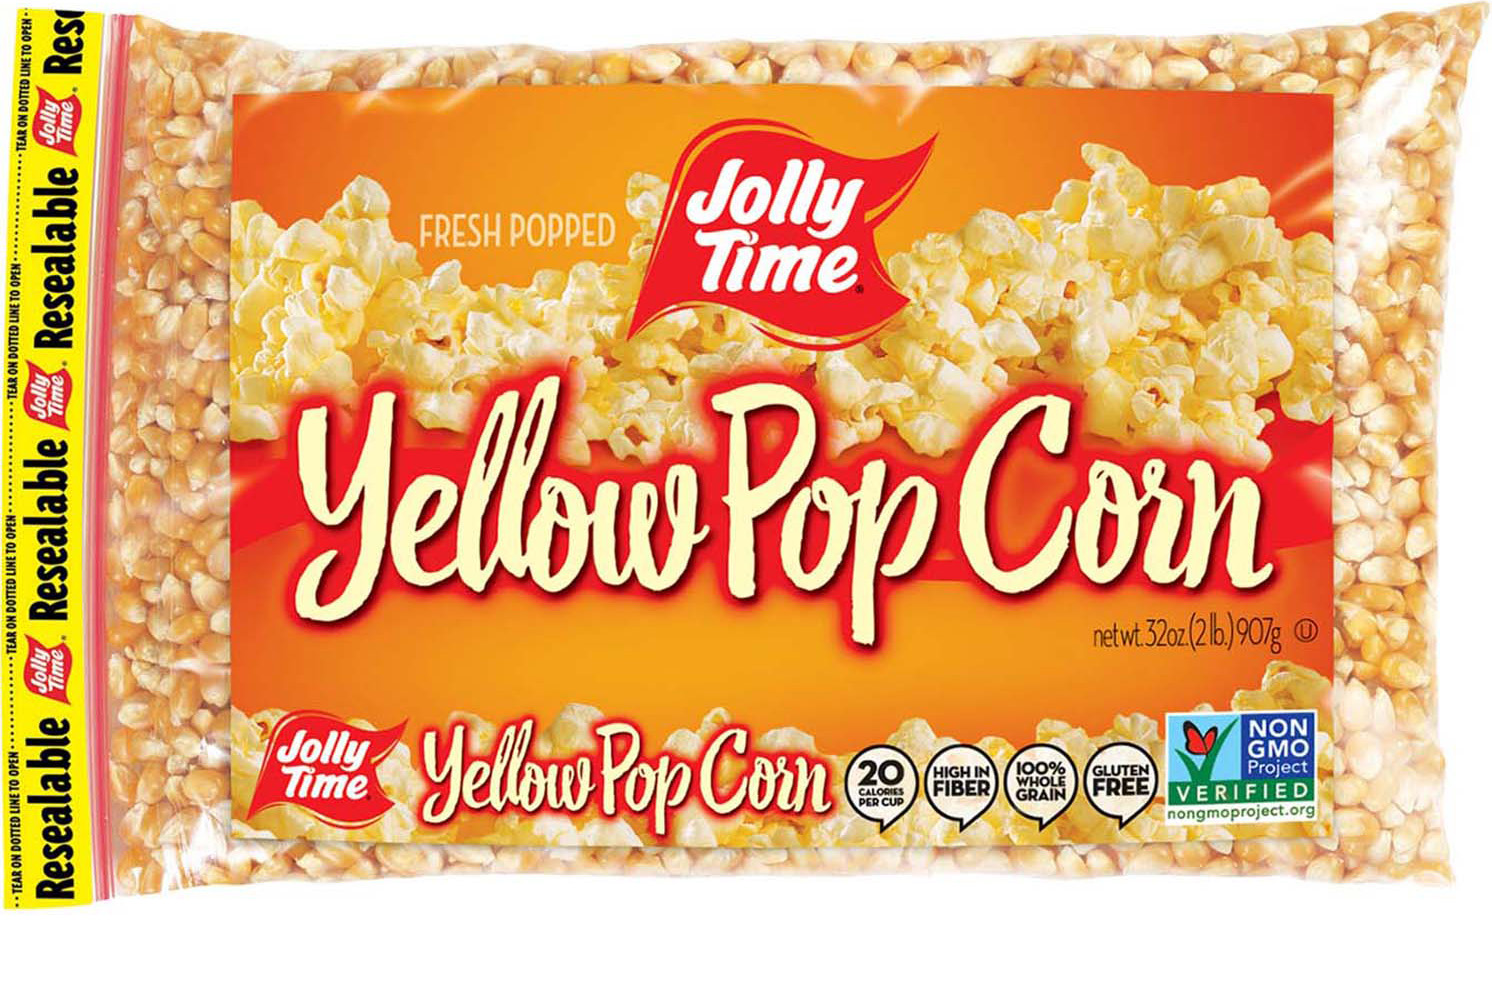 Jolly Time Yellow Popcorn Kernels Product Image